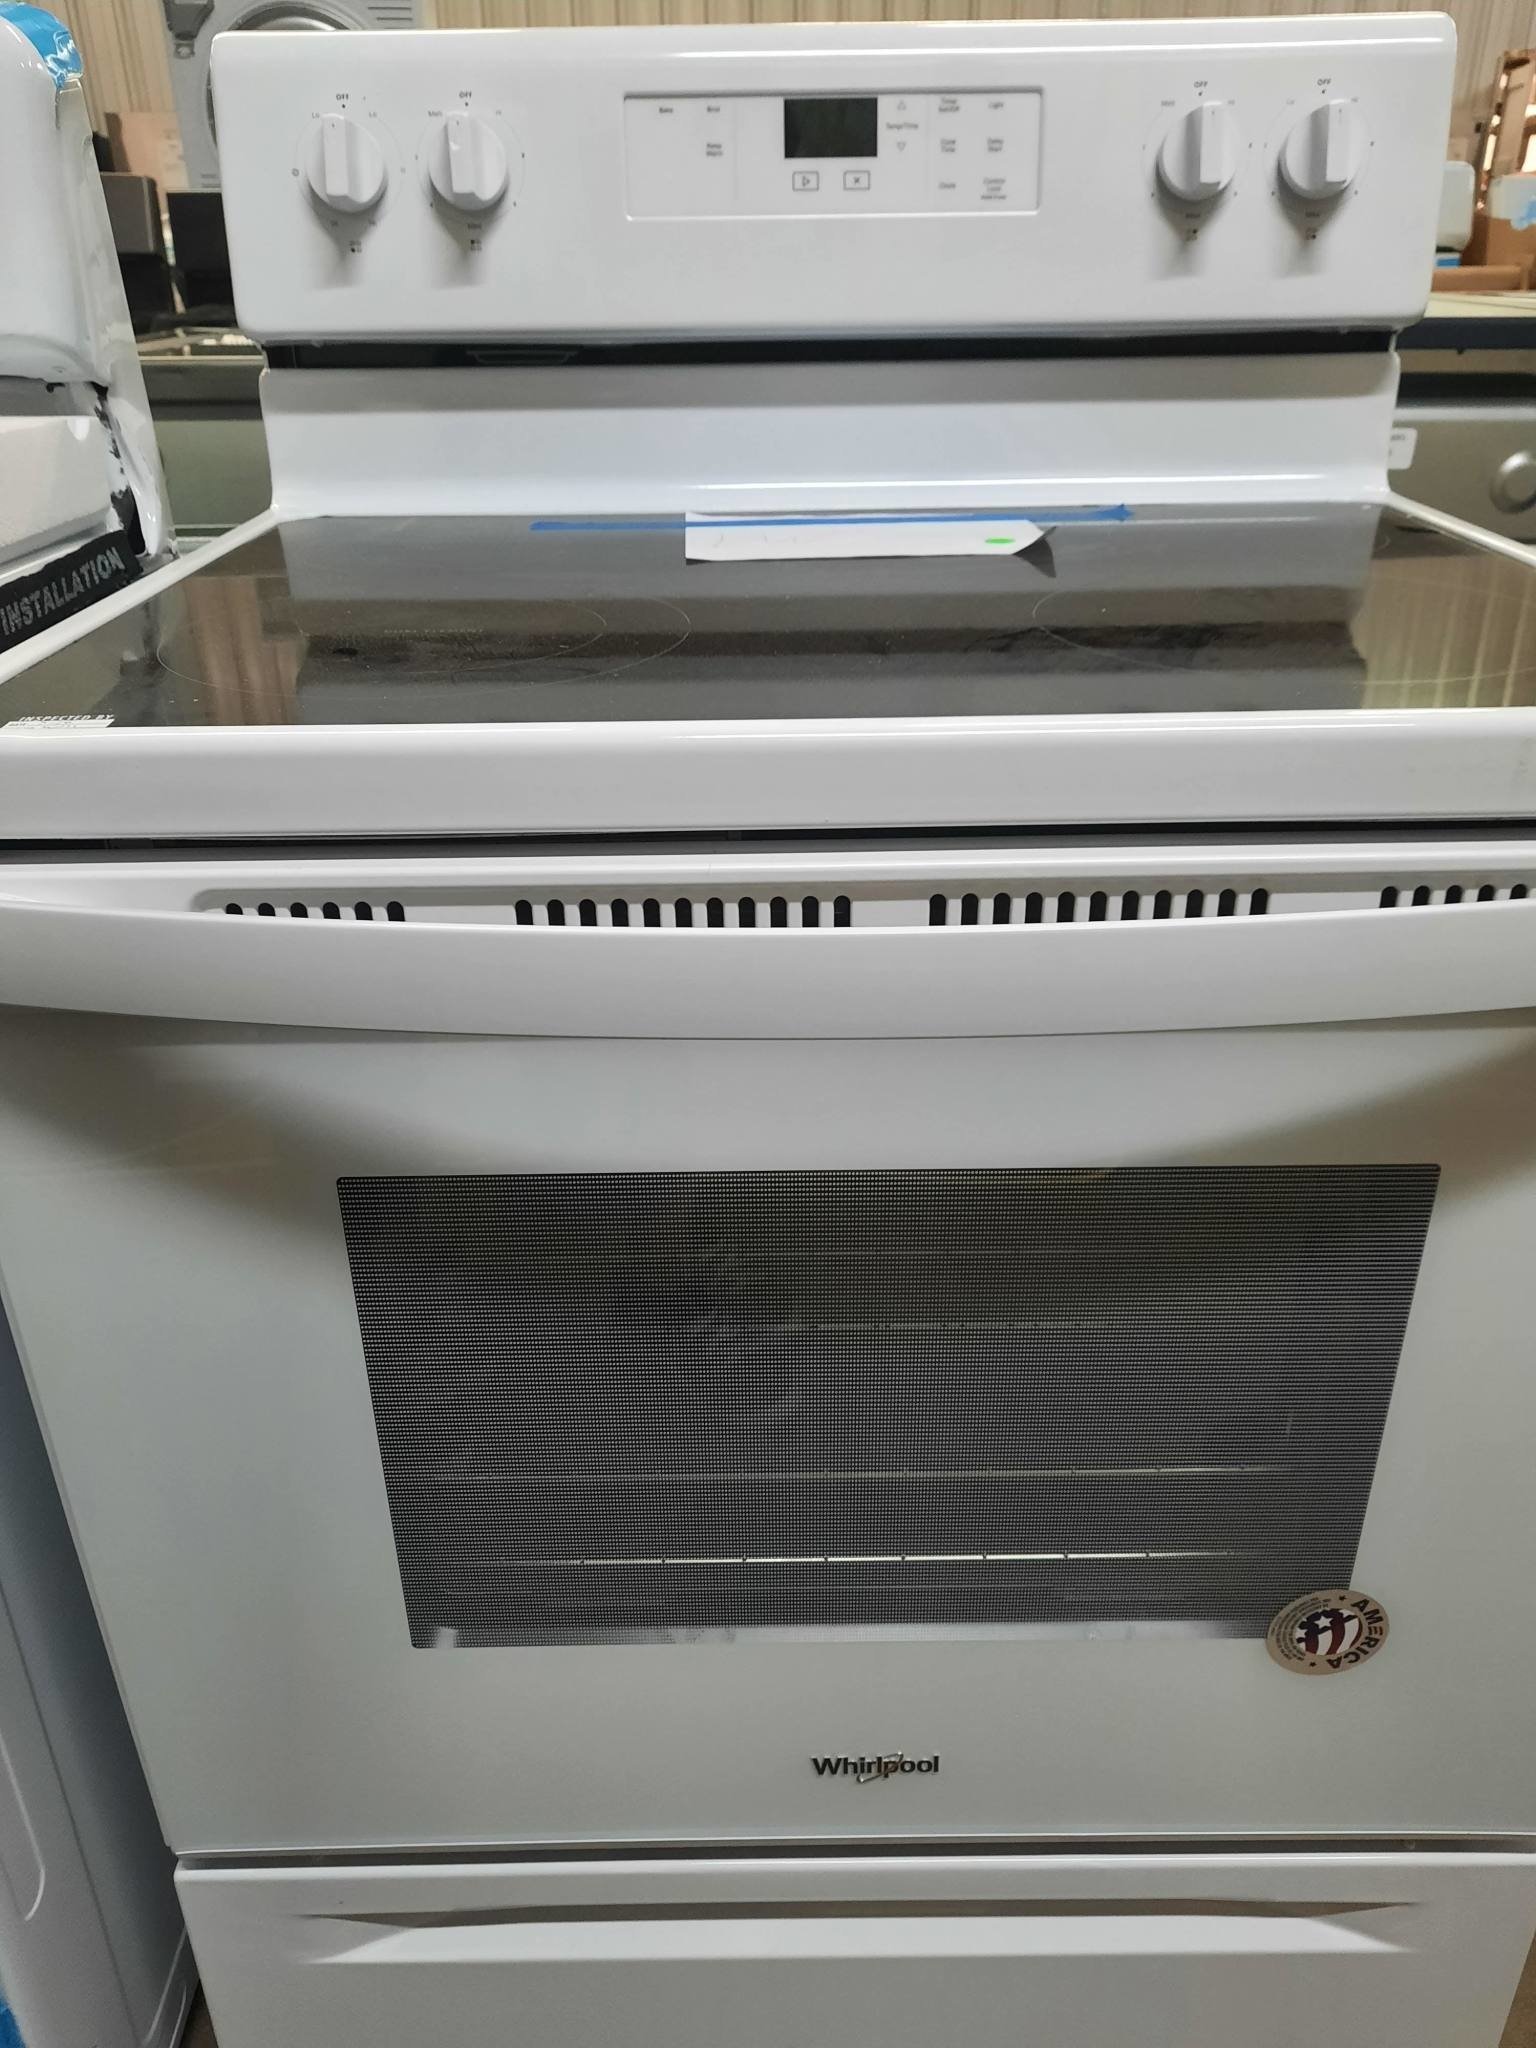 Whirlpool *Whirlpool WFE320M0JW  30 in. 5.3 cu. ft. 4-Burner Electric Range in White with Storage Drawer